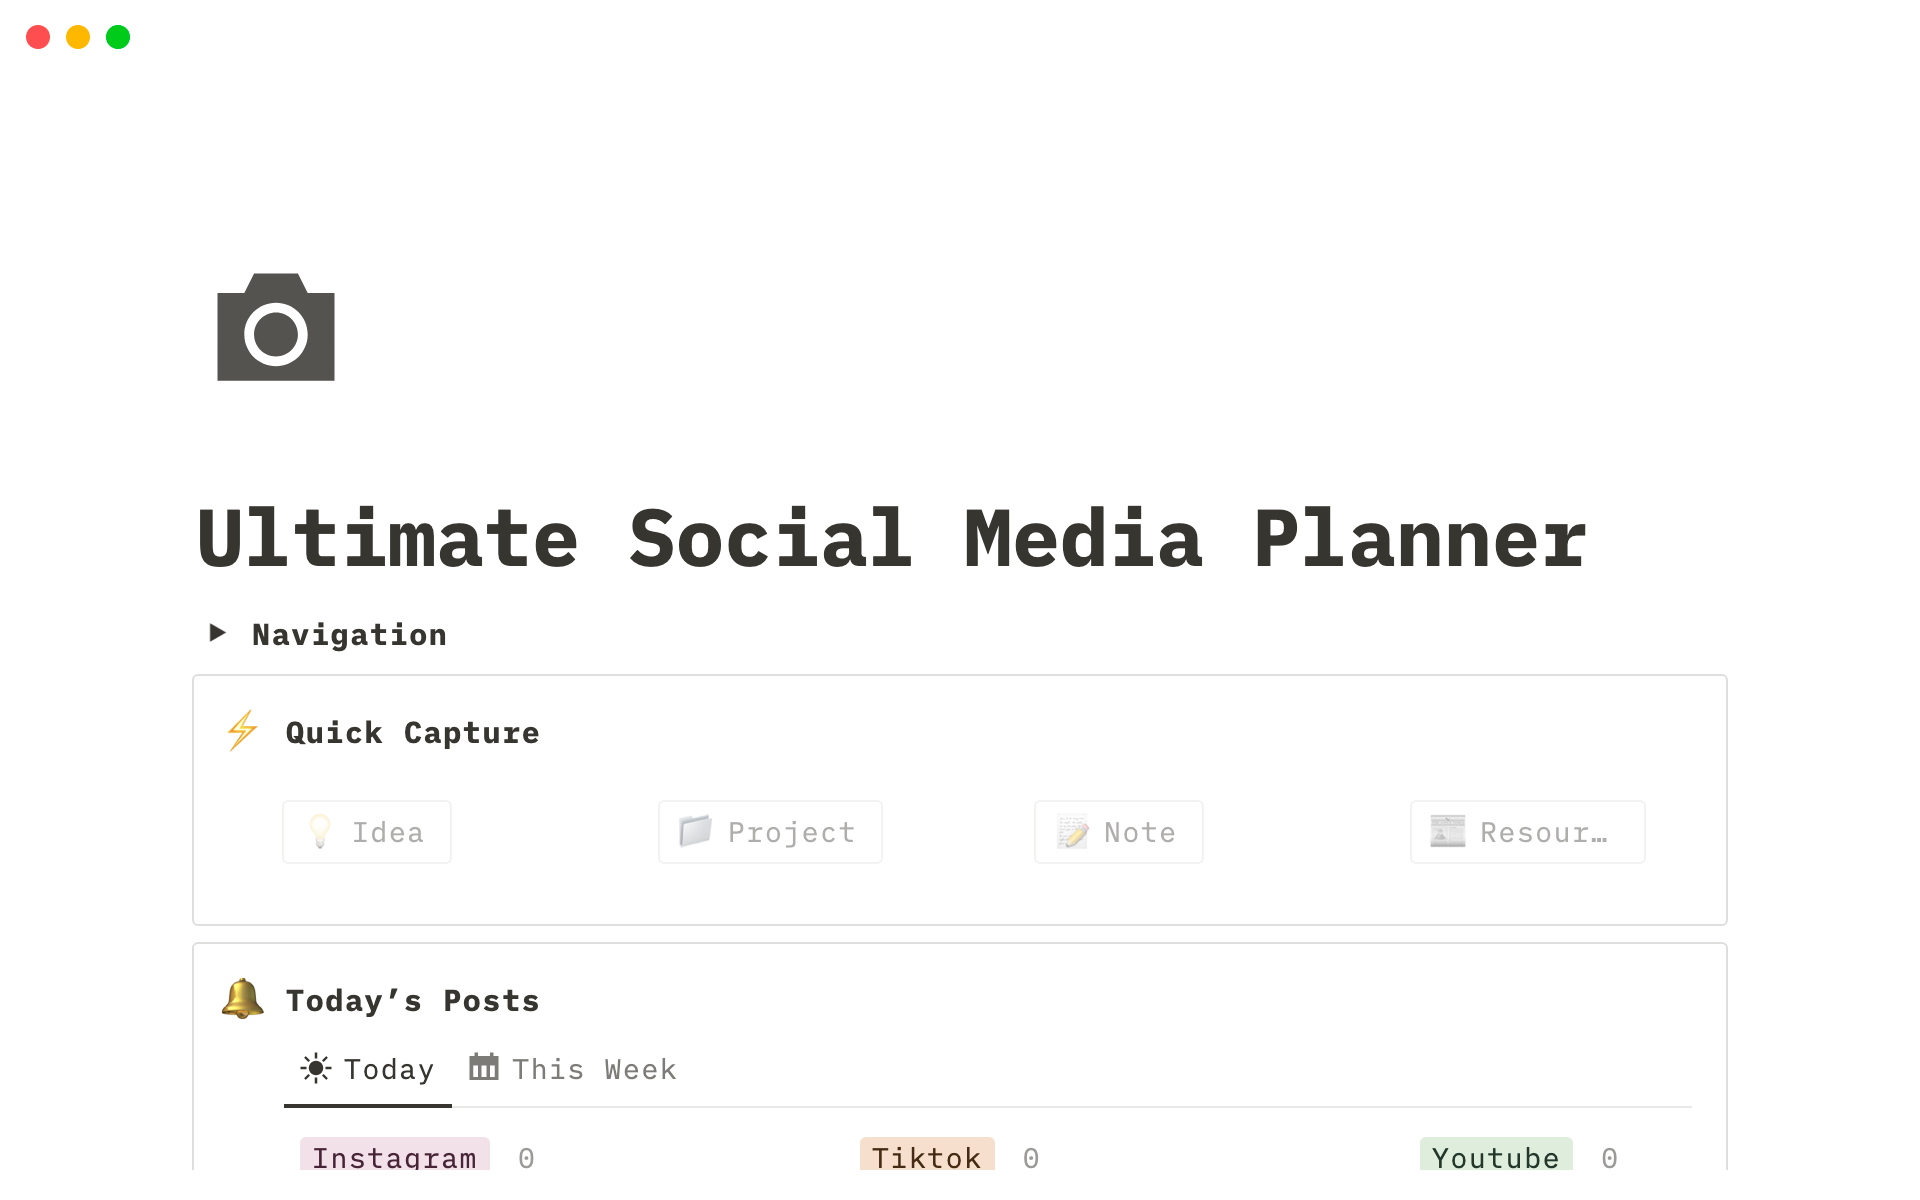 A simple template to capture your ideas for your social media platform. Capture ideas, plan and execute them.